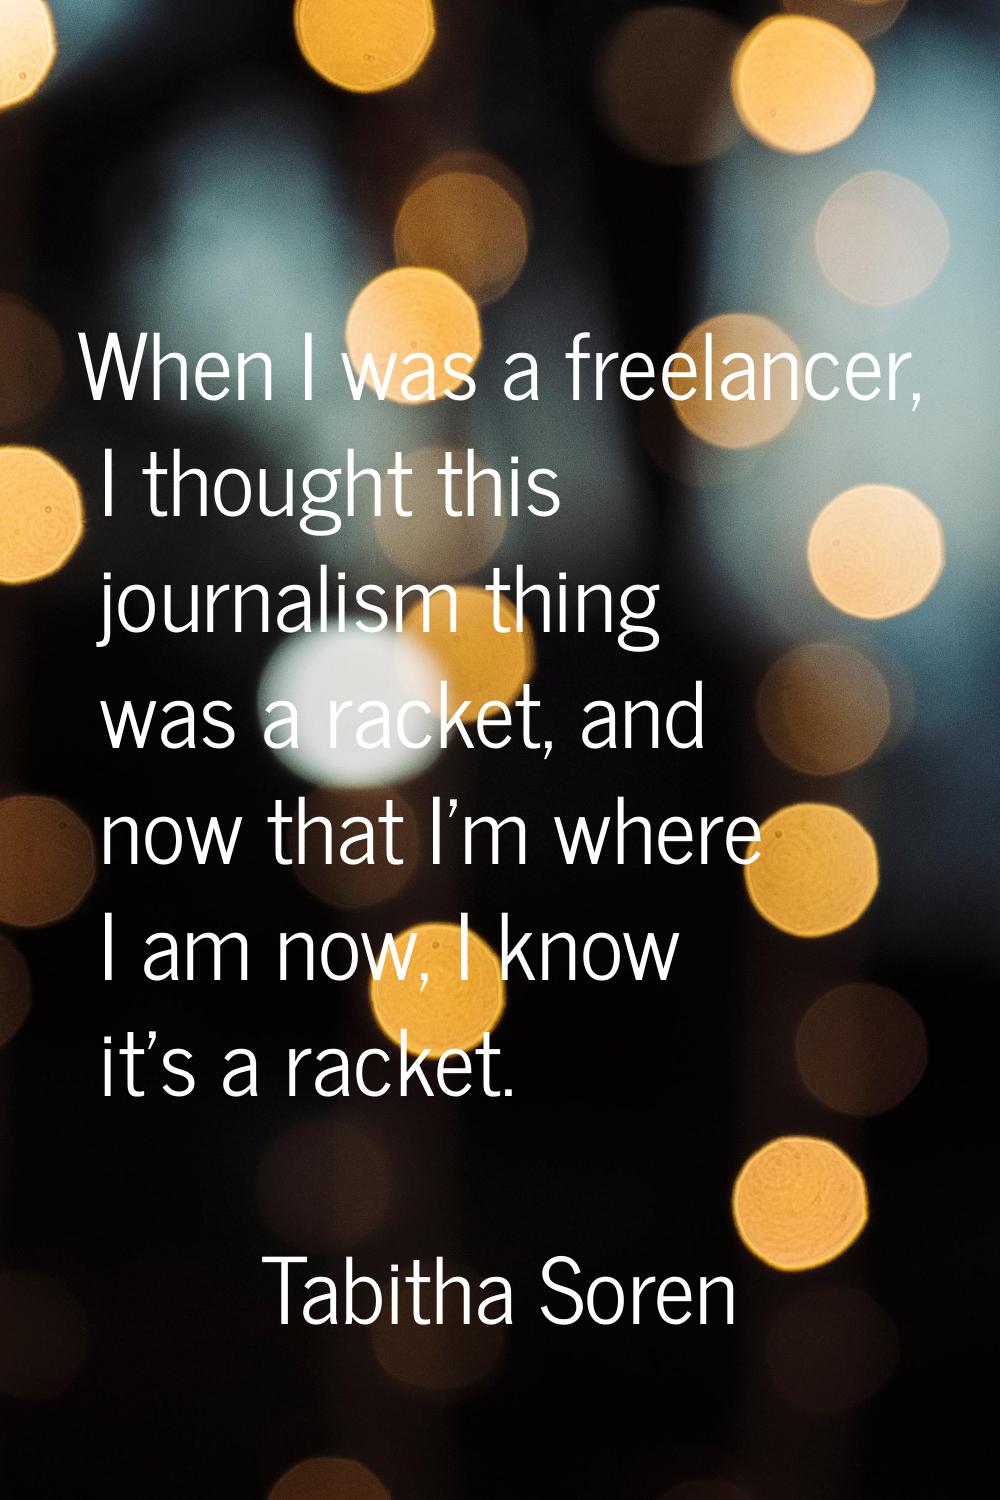 When I was a freelancer, I thought this journalism thing was a racket, and now that I'm where I am 